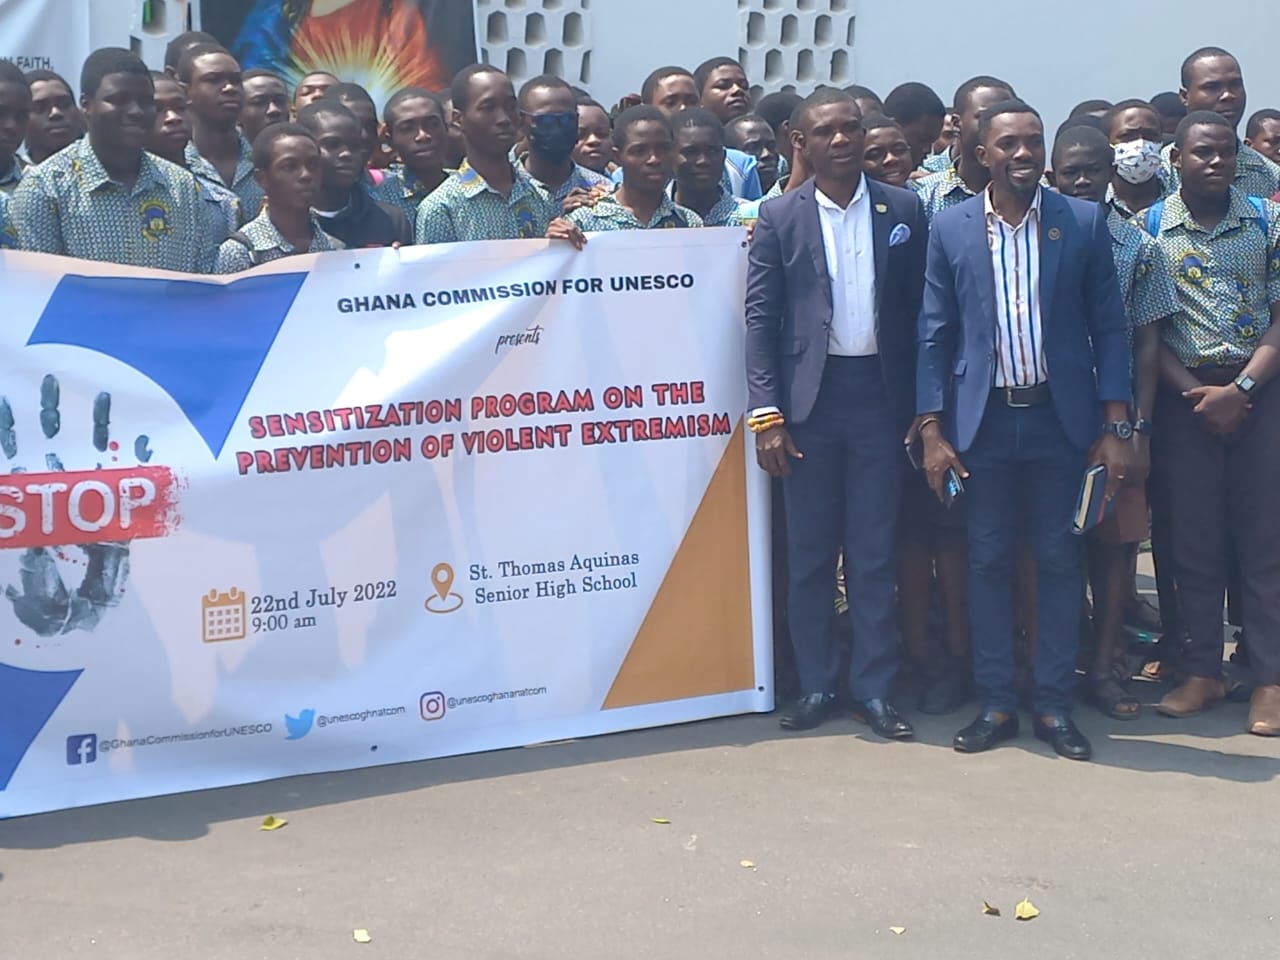 IISS and UNESCO Ghana Commission sensitizes students student prevention of violent extremism